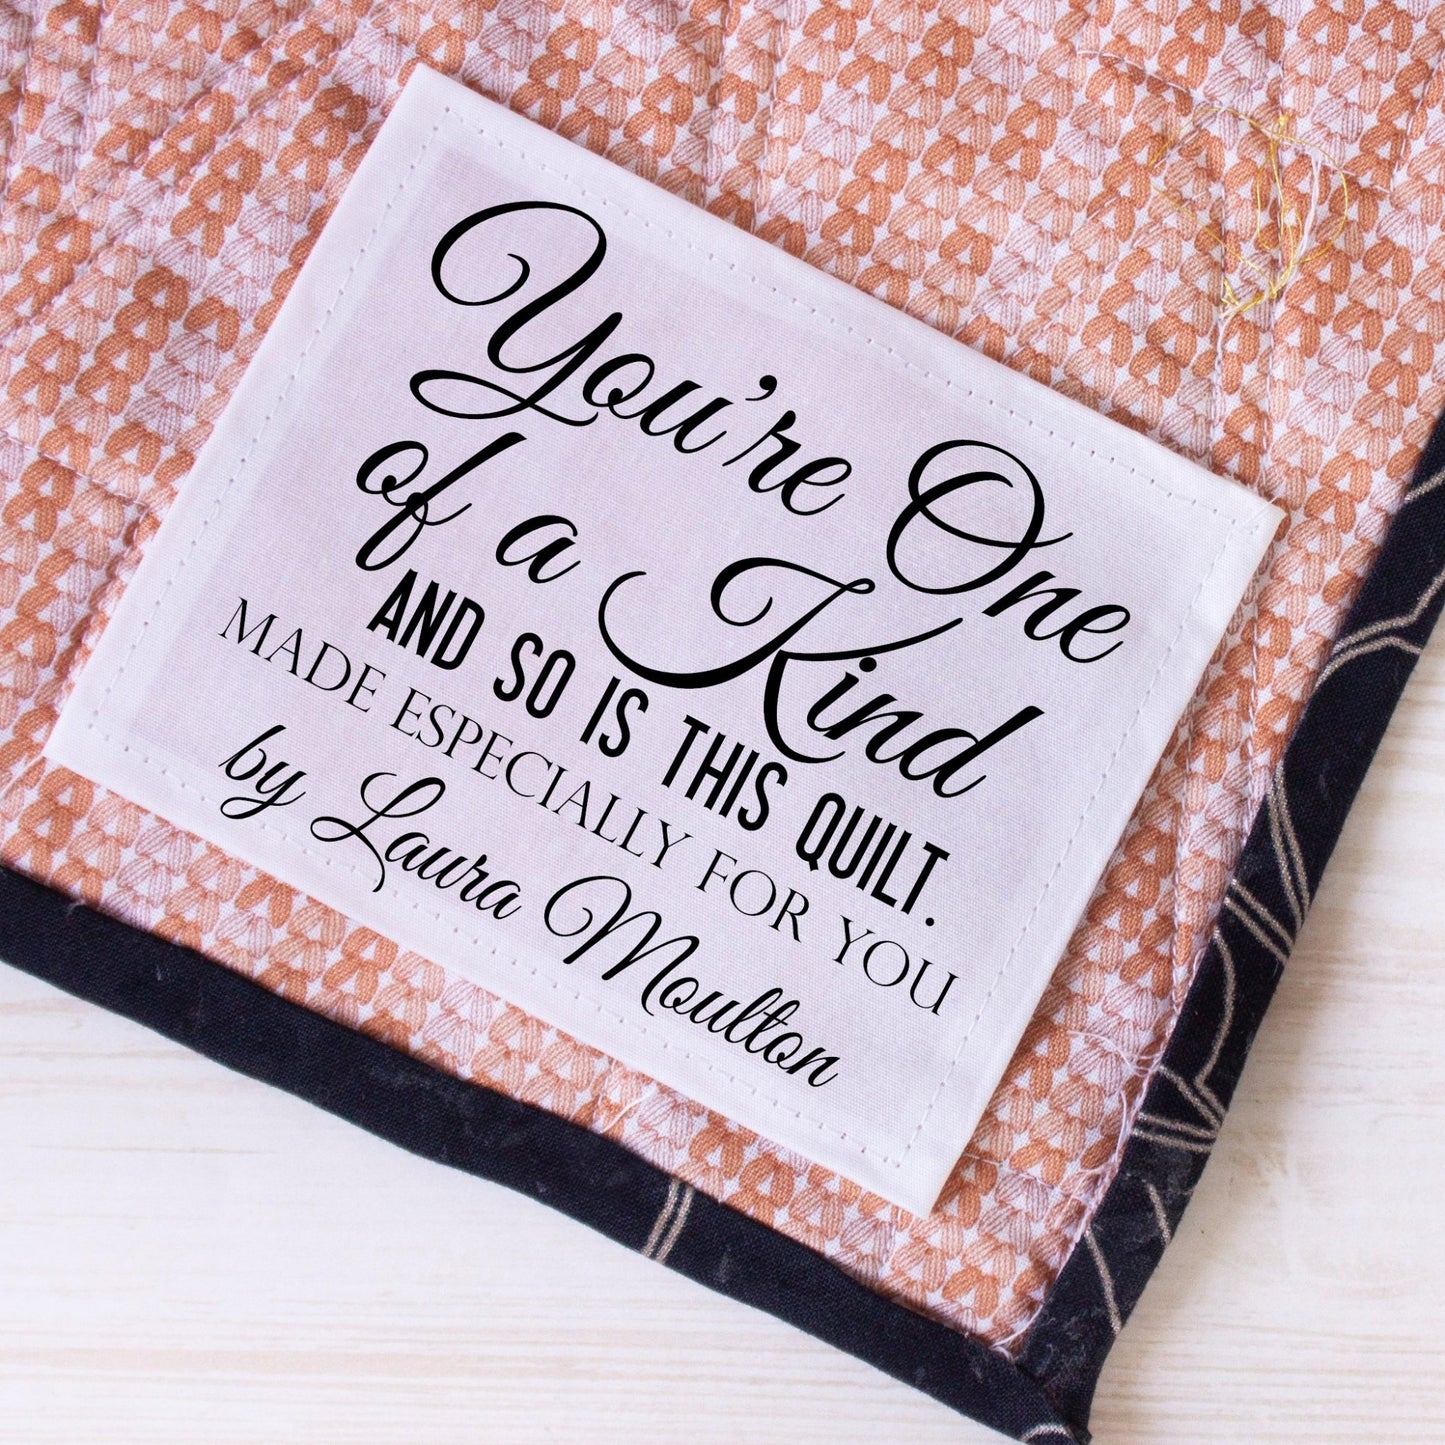 You're One of A Kind and So is this Quilt. Unique personalized quilt labels - Jammin Threads